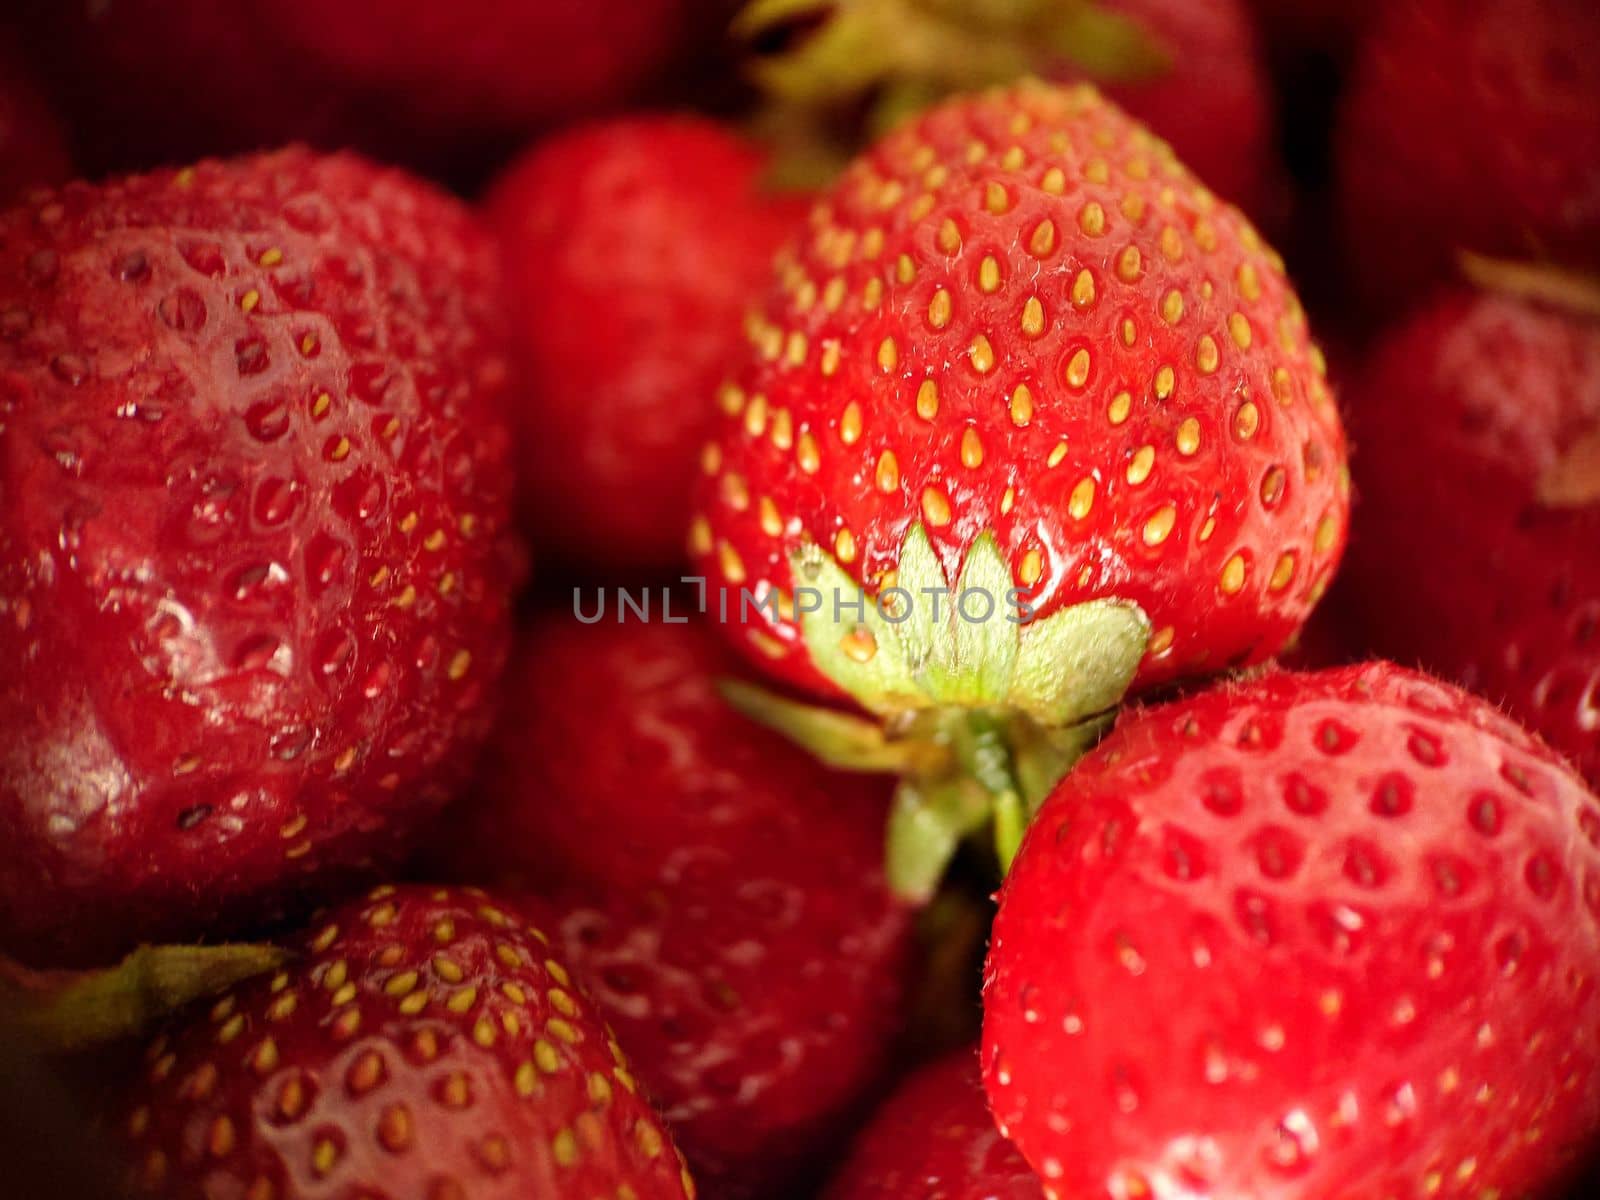 Red large strawberry berry selective focus close-up by Mastak80